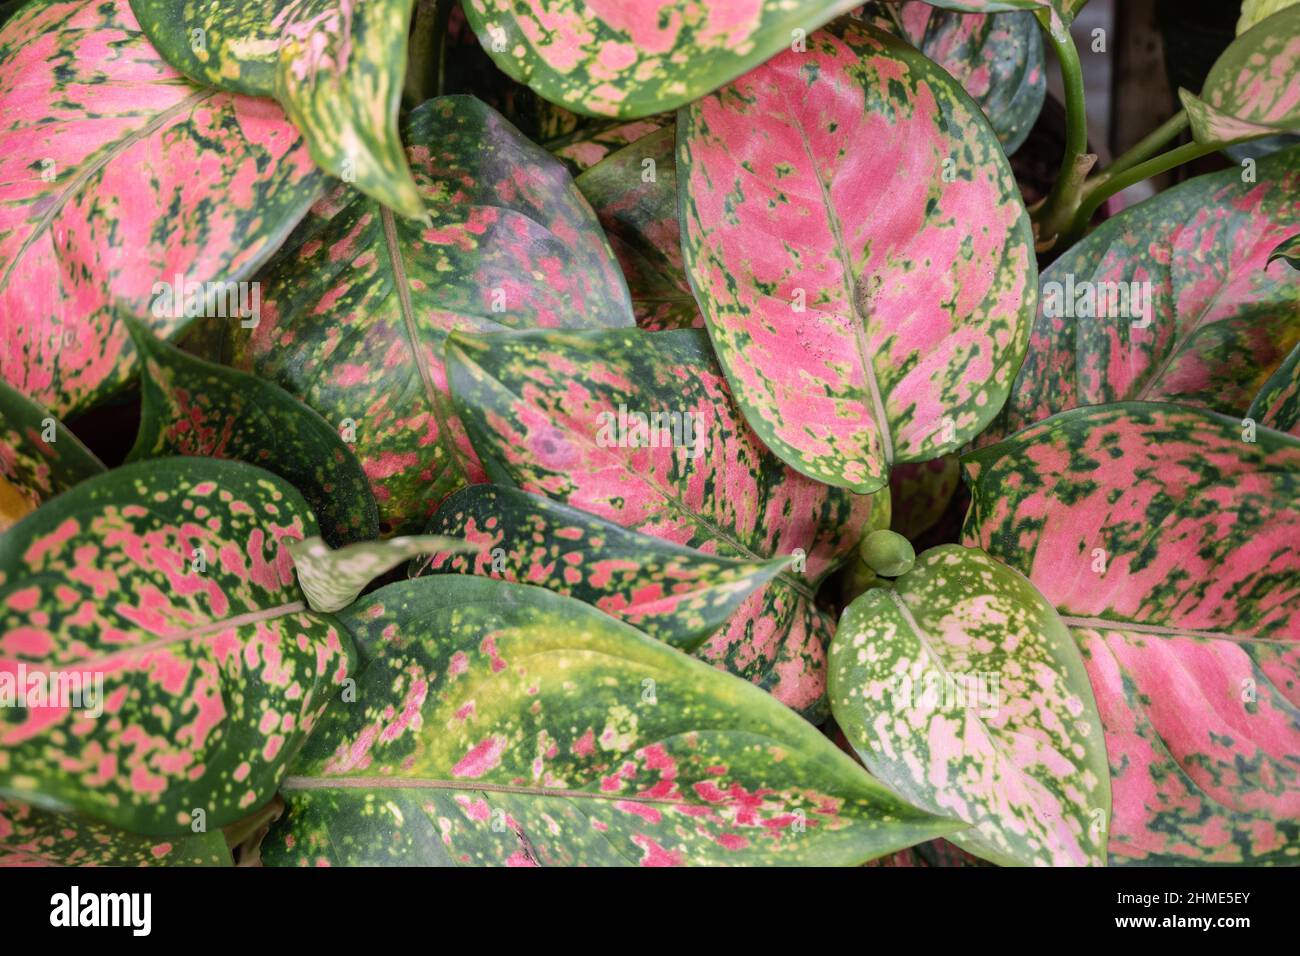 Red and green aglaonema leaves close up picture Stock Photo